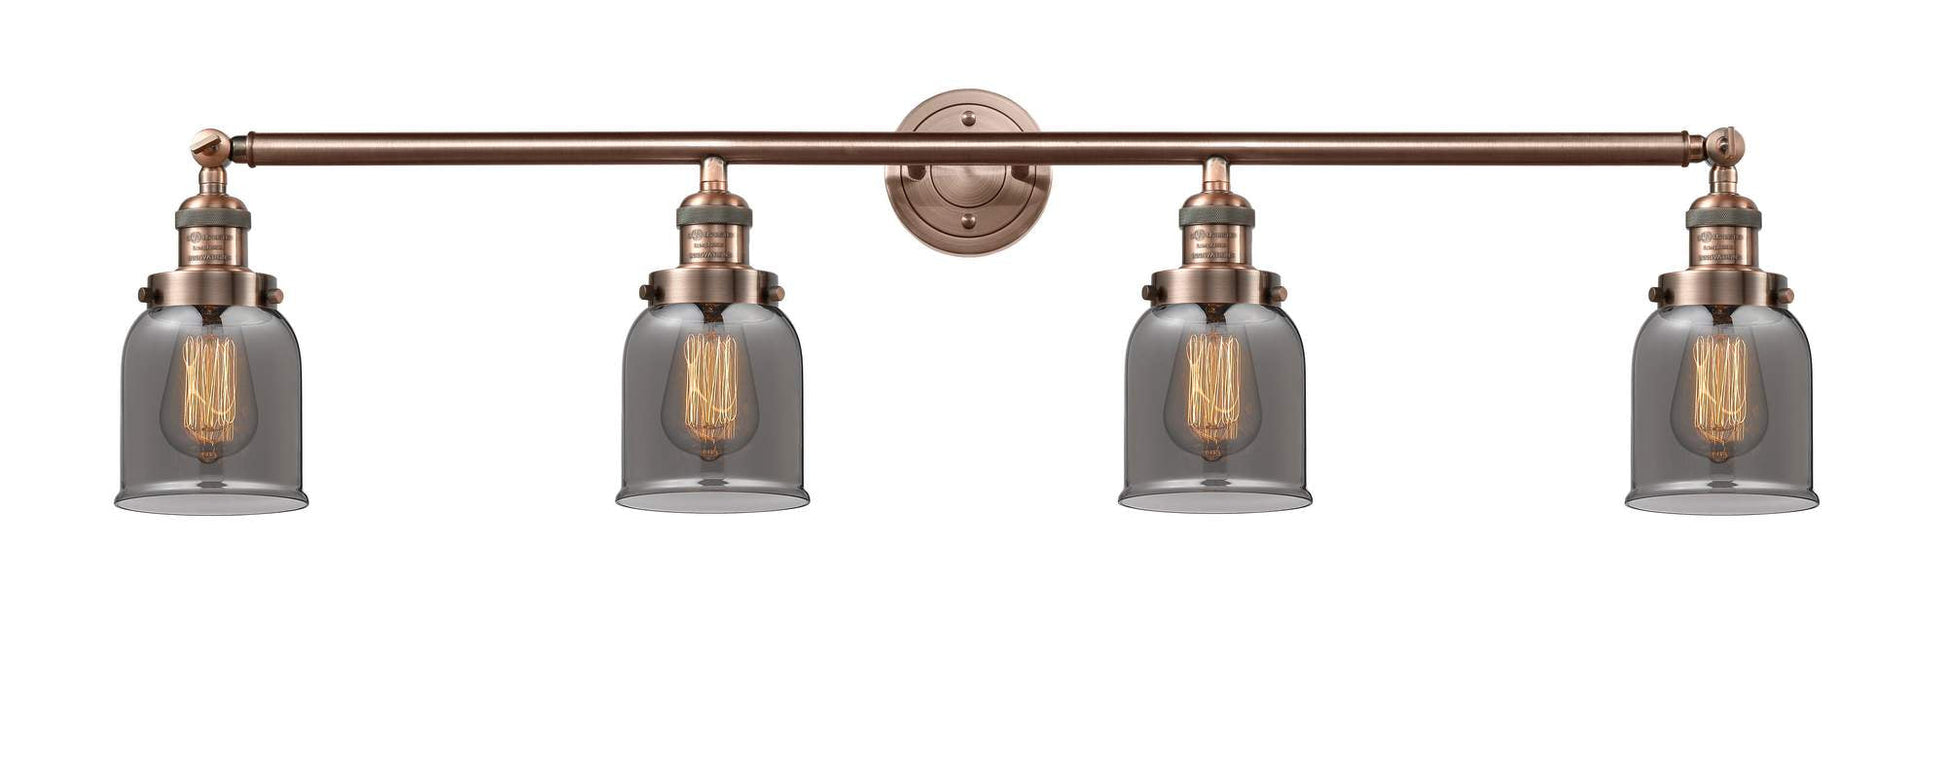 215-AC-G53 4-Light 42" Antique Copper Bath Vanity Light - Plated Smoke Small Bell Glass - LED Bulb - Dimmensions: 42 x 7 x 9.75 - Glass Up or Down: Yes